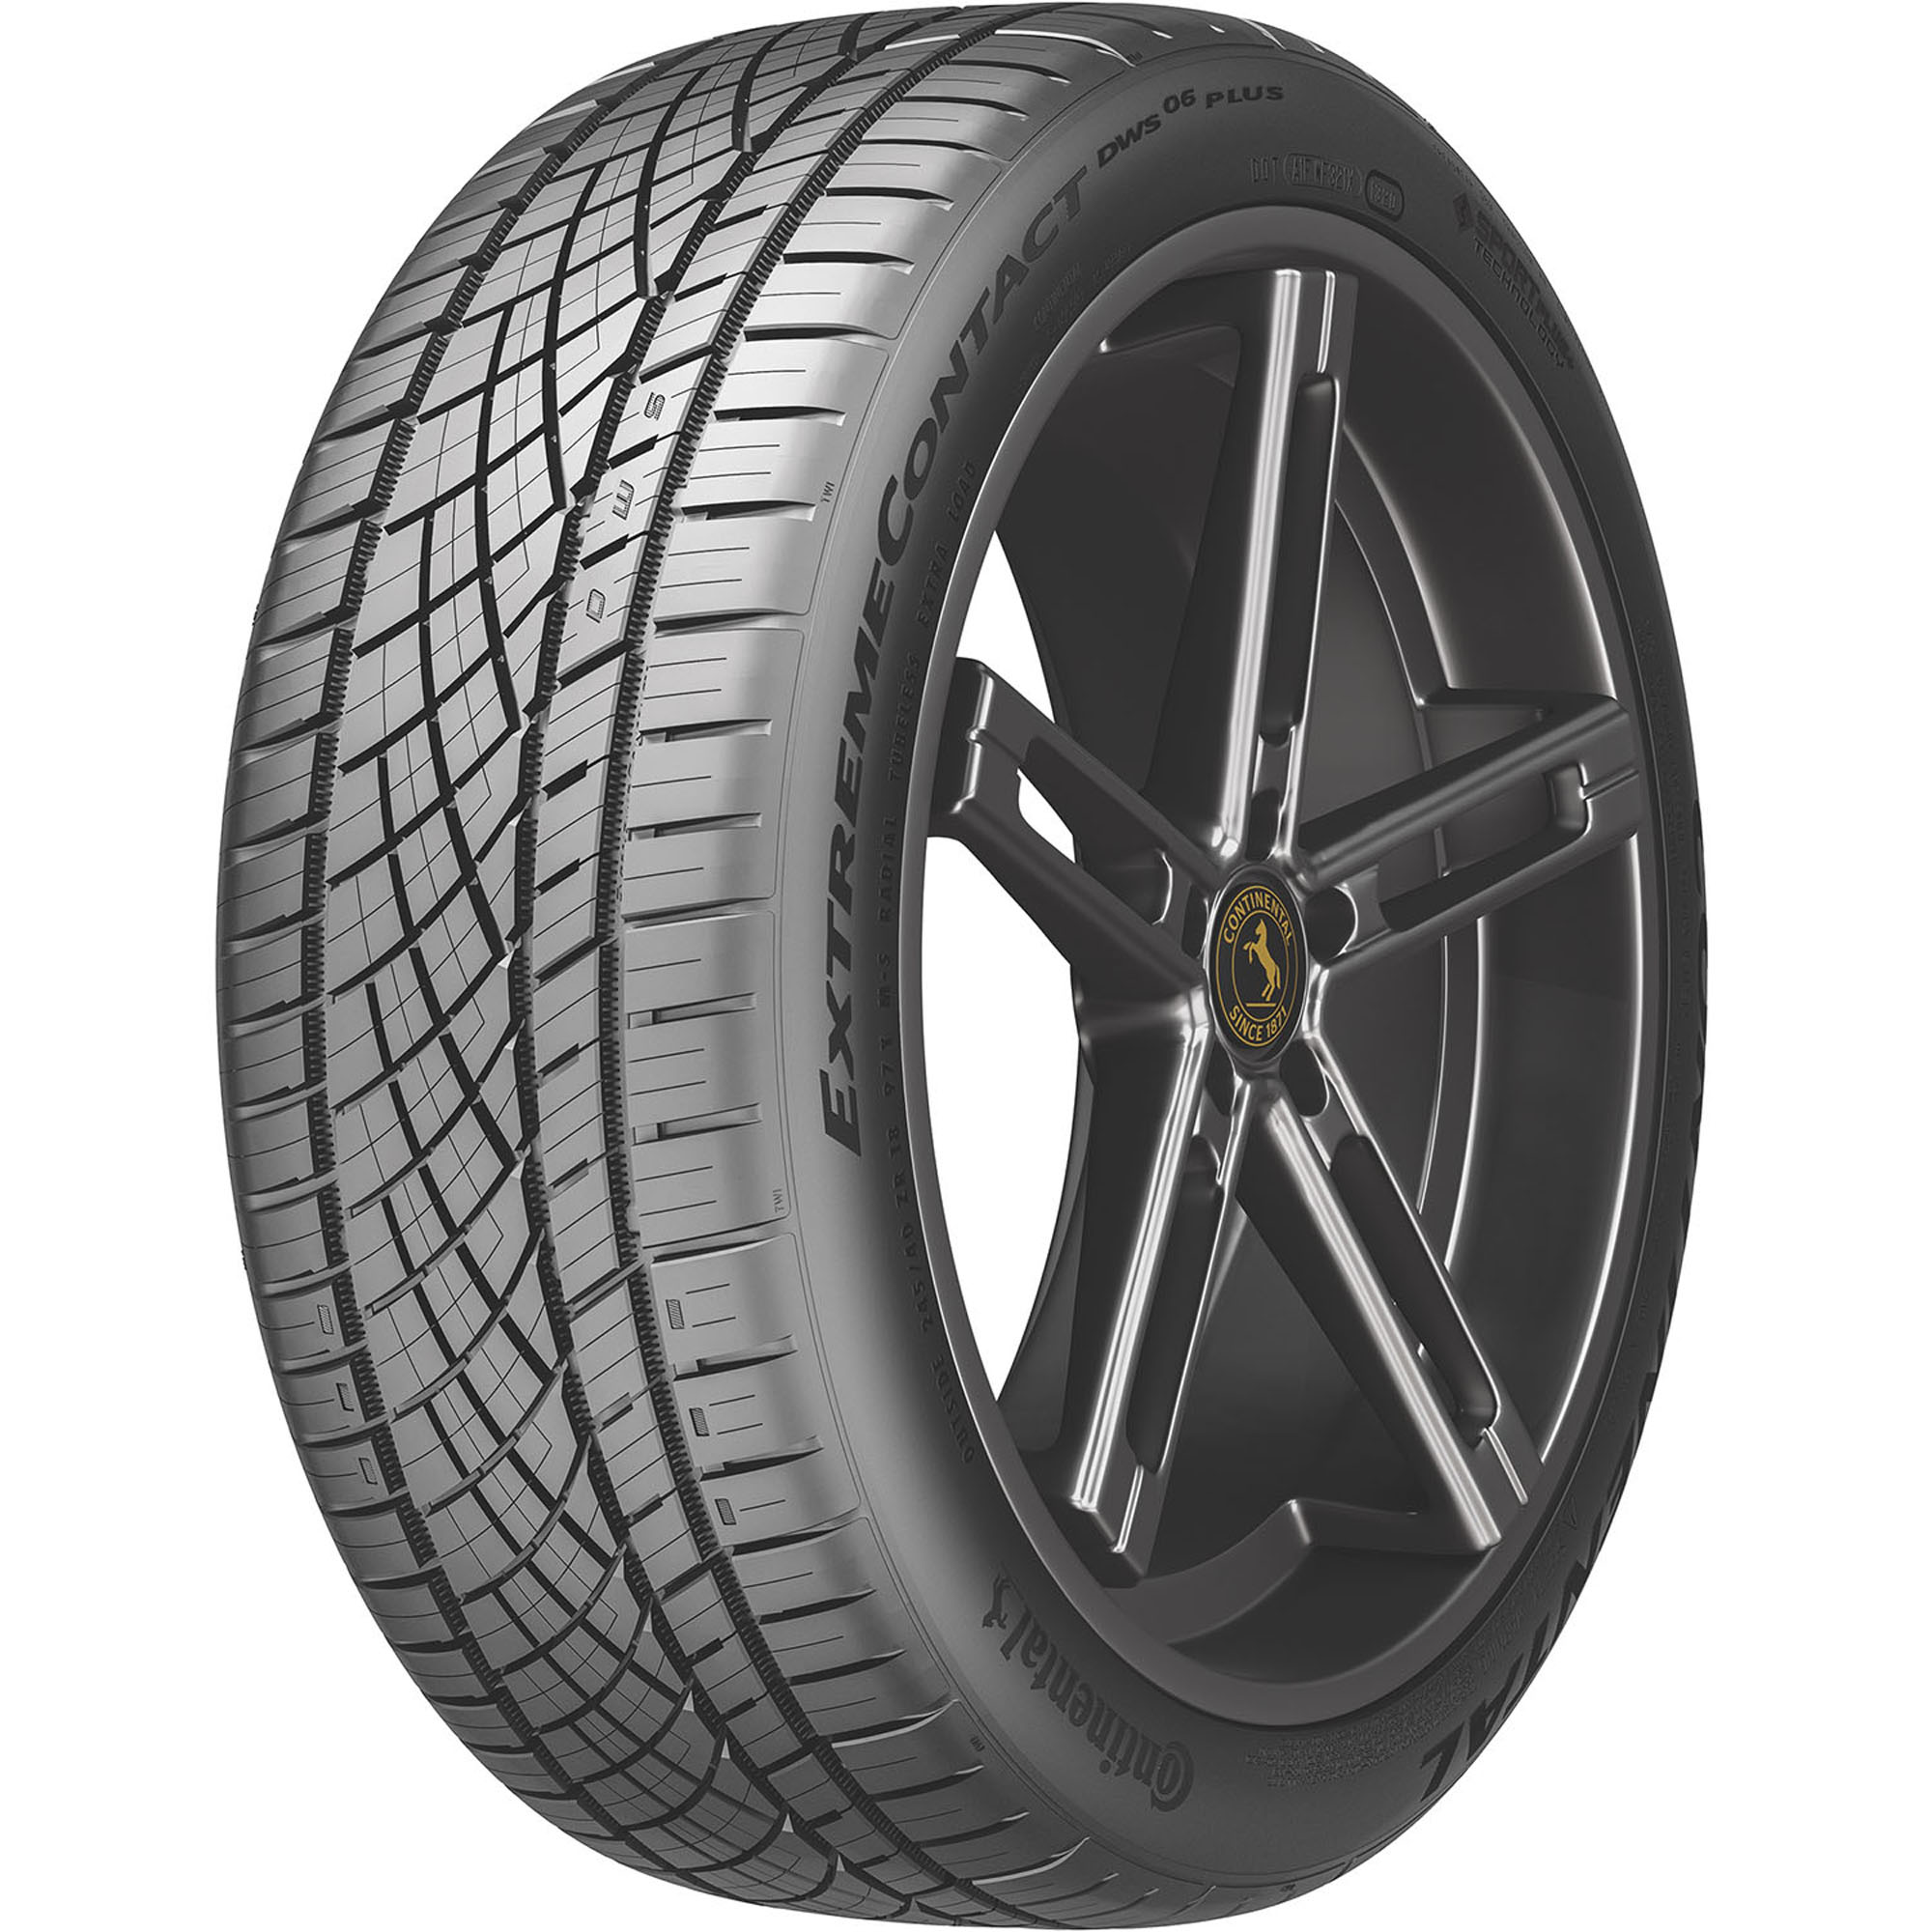 Continental ExtremeContact DWS06 PLUS All Season 275/35ZR20 102Y XL Passenger Tire - image 1 of 6